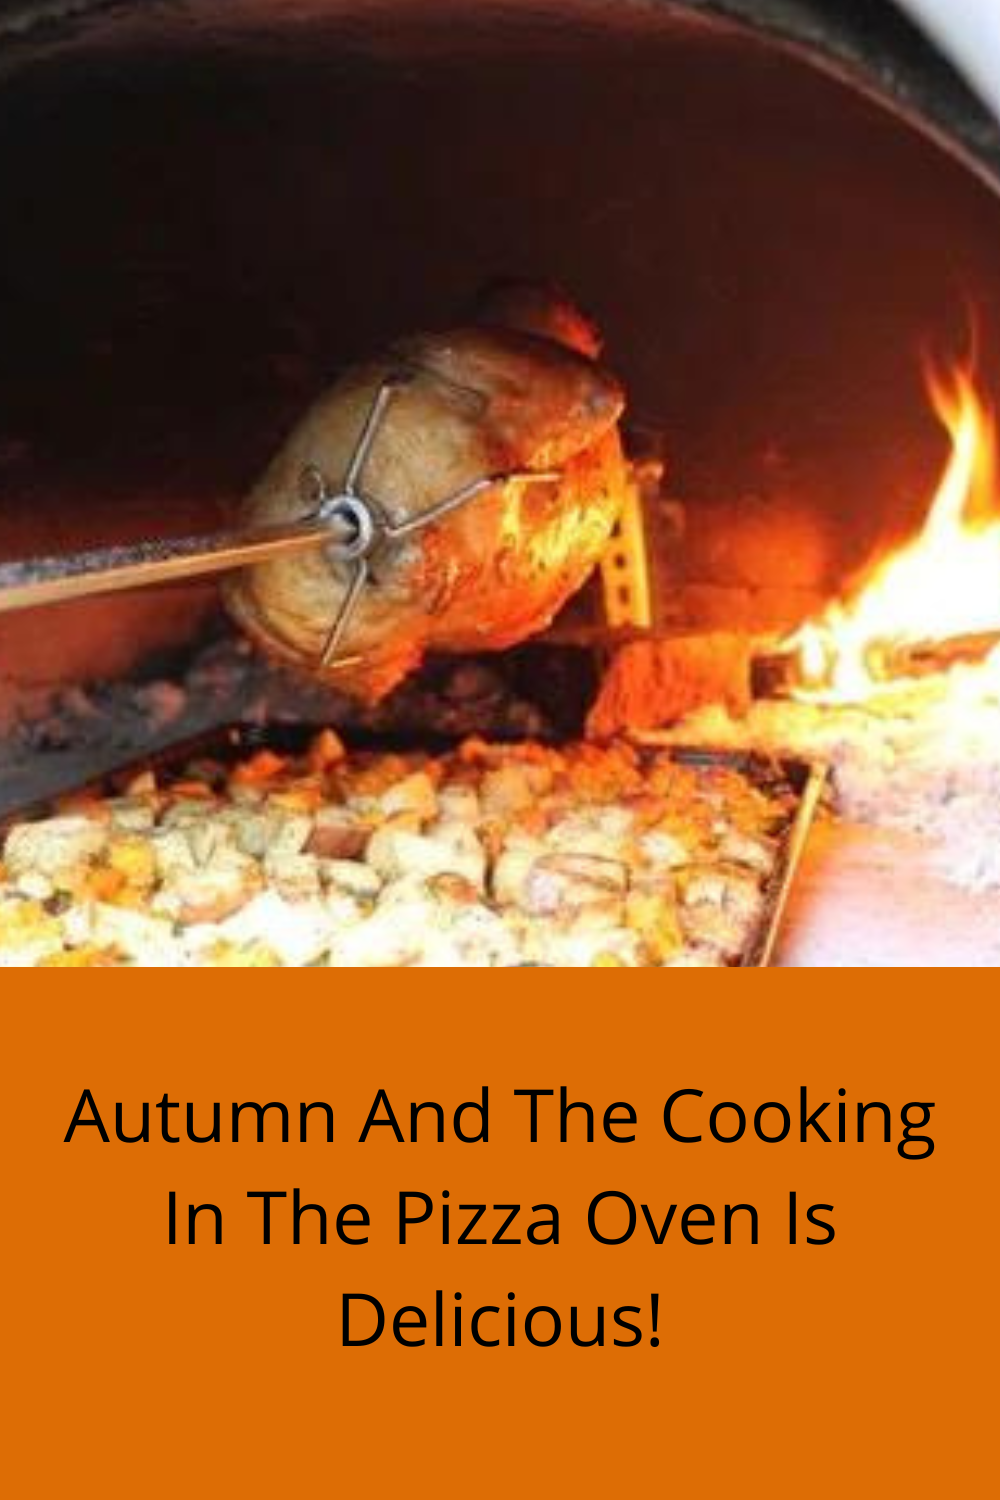 Autumn And The Cooking In The Pizza Oven Is Delicious!